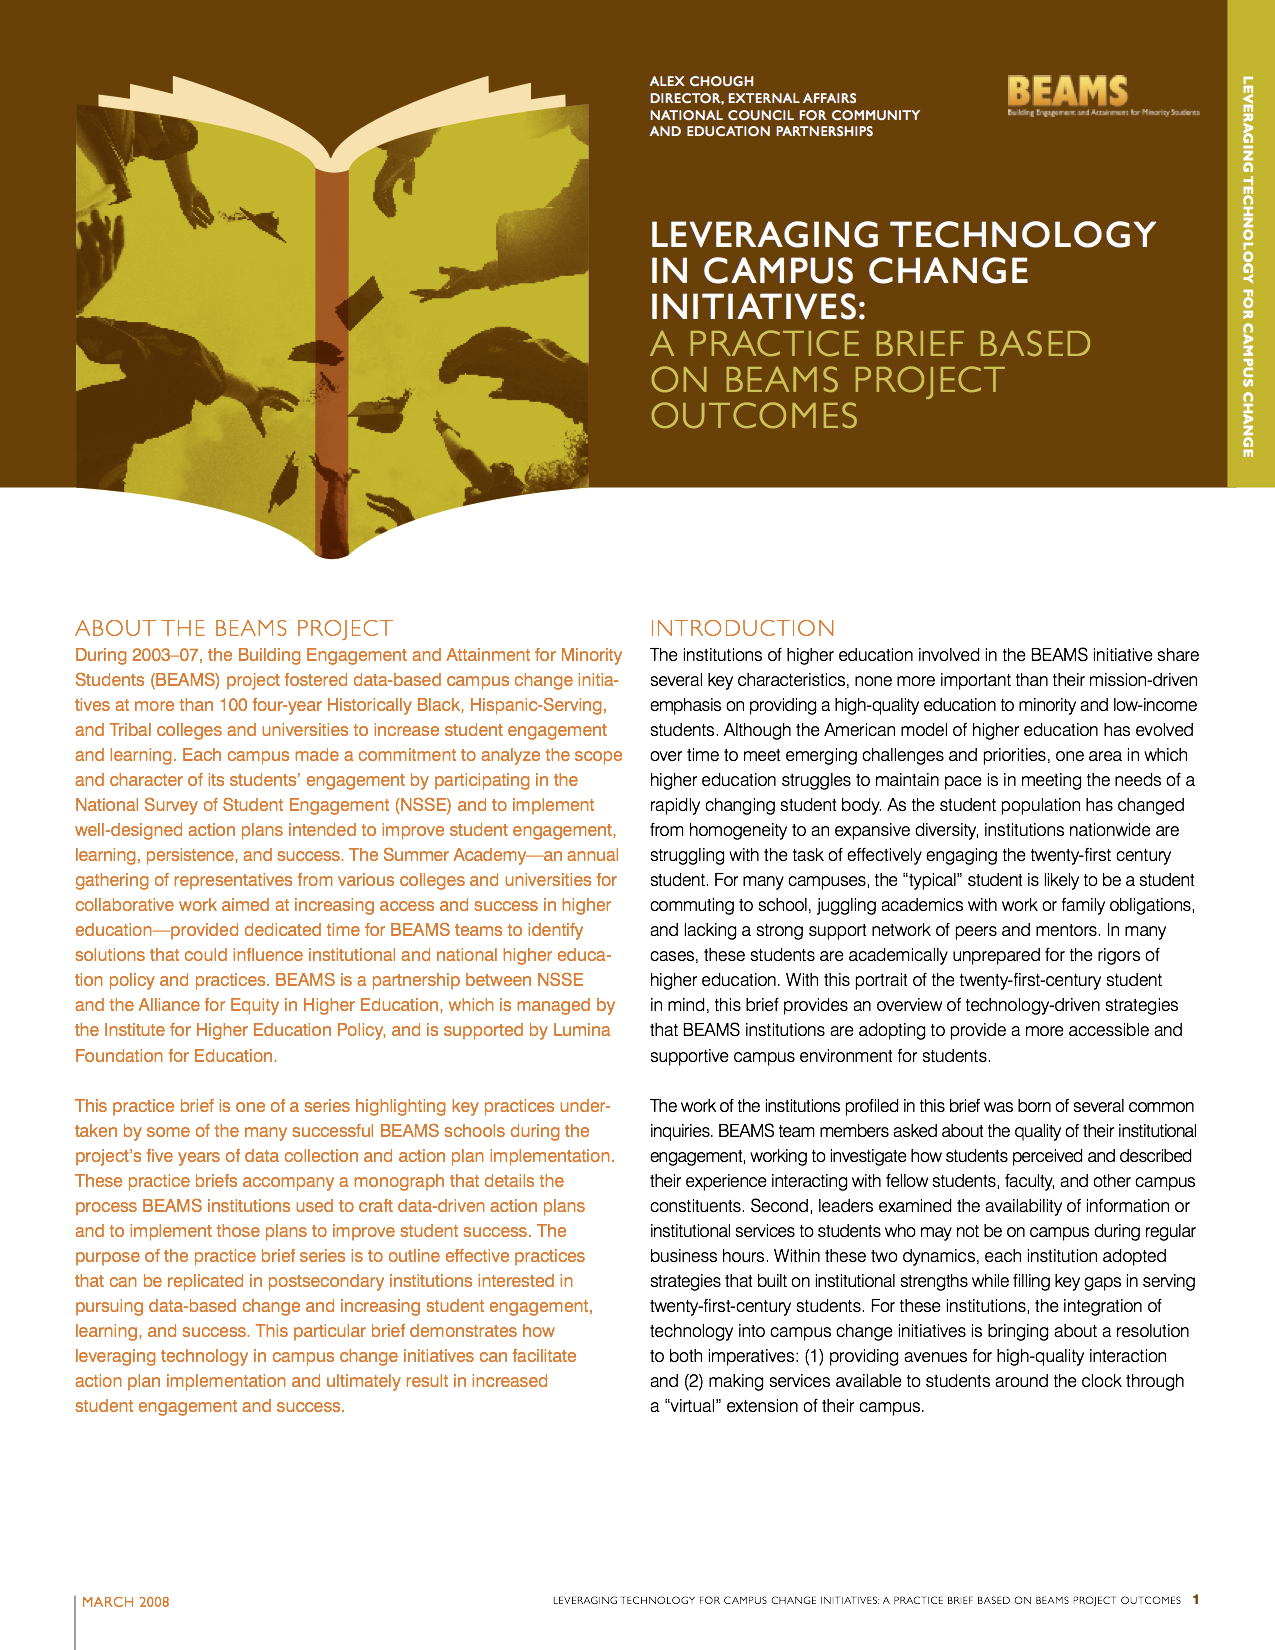 Leveraging Technology in Campus Change Initiatives: A Practice Brief Based on BEAMS Project Outcomes